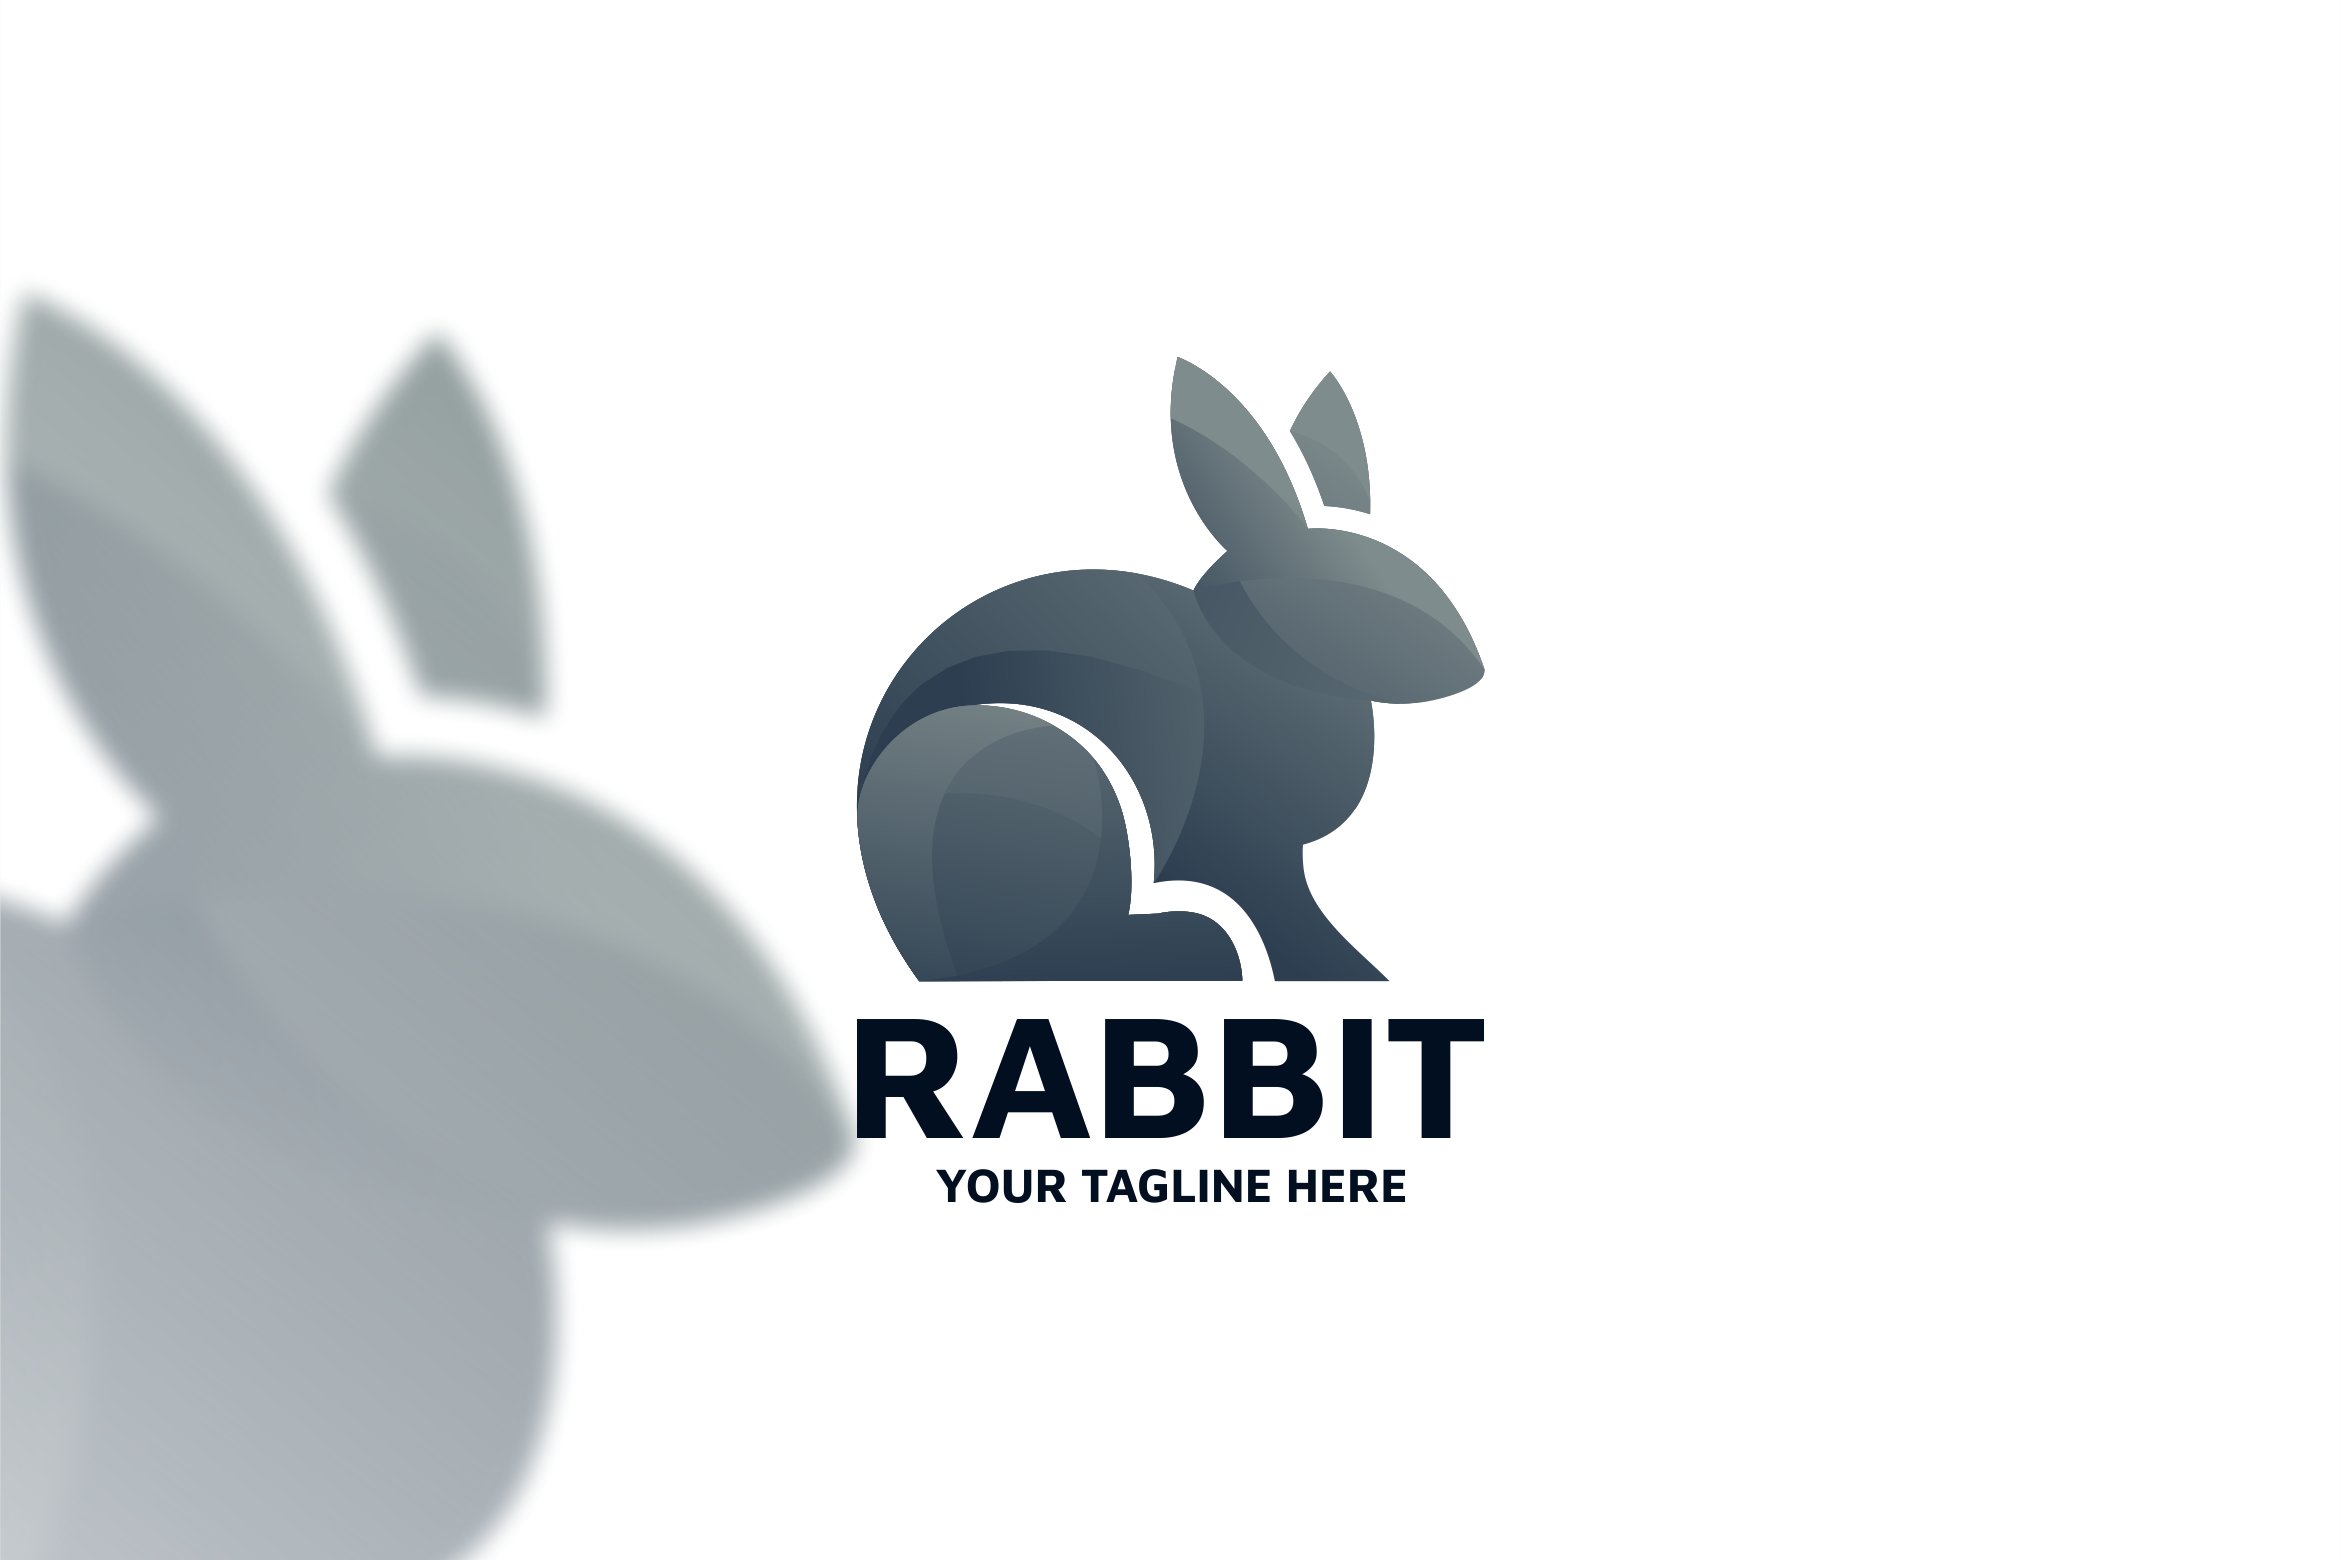 RABBIT LOGO TEMPLATE cover image.